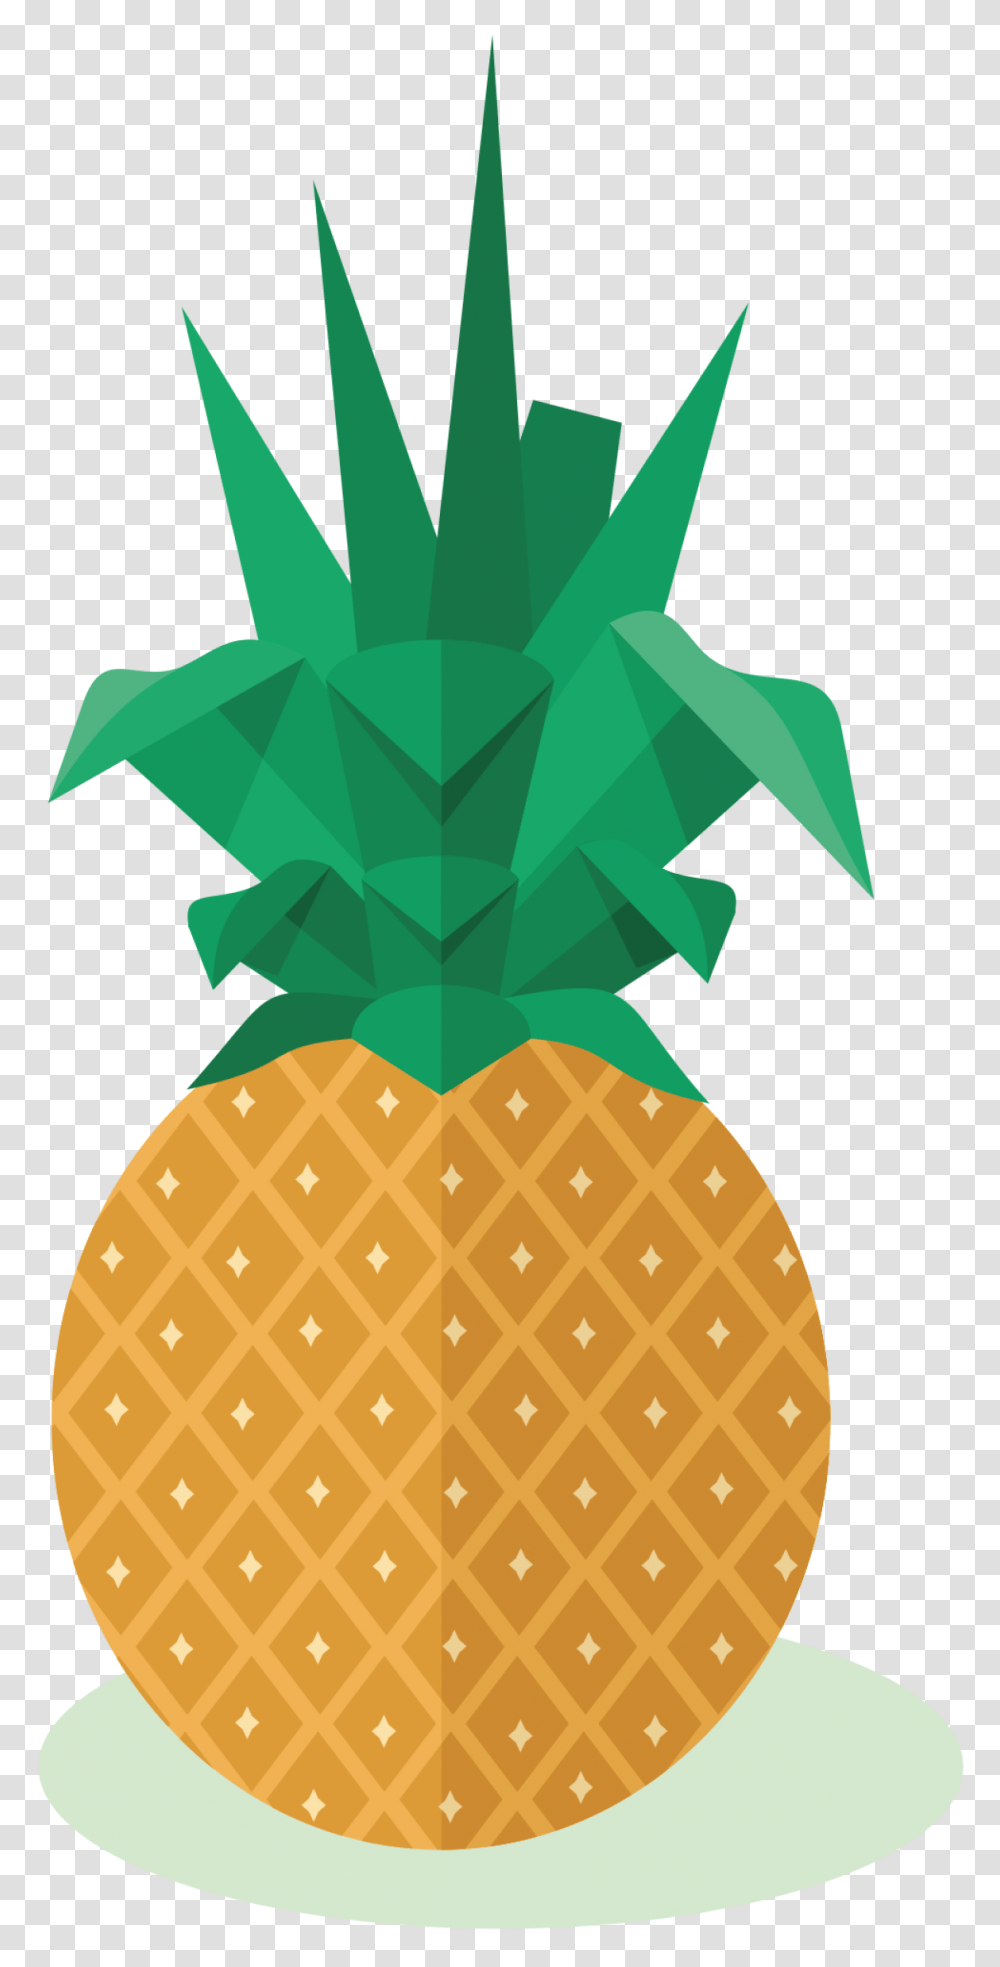 Download Hd Pineapple Fruit Clipart Of Pineapple, Plant, Food, Cross, Symbol Transparent Png